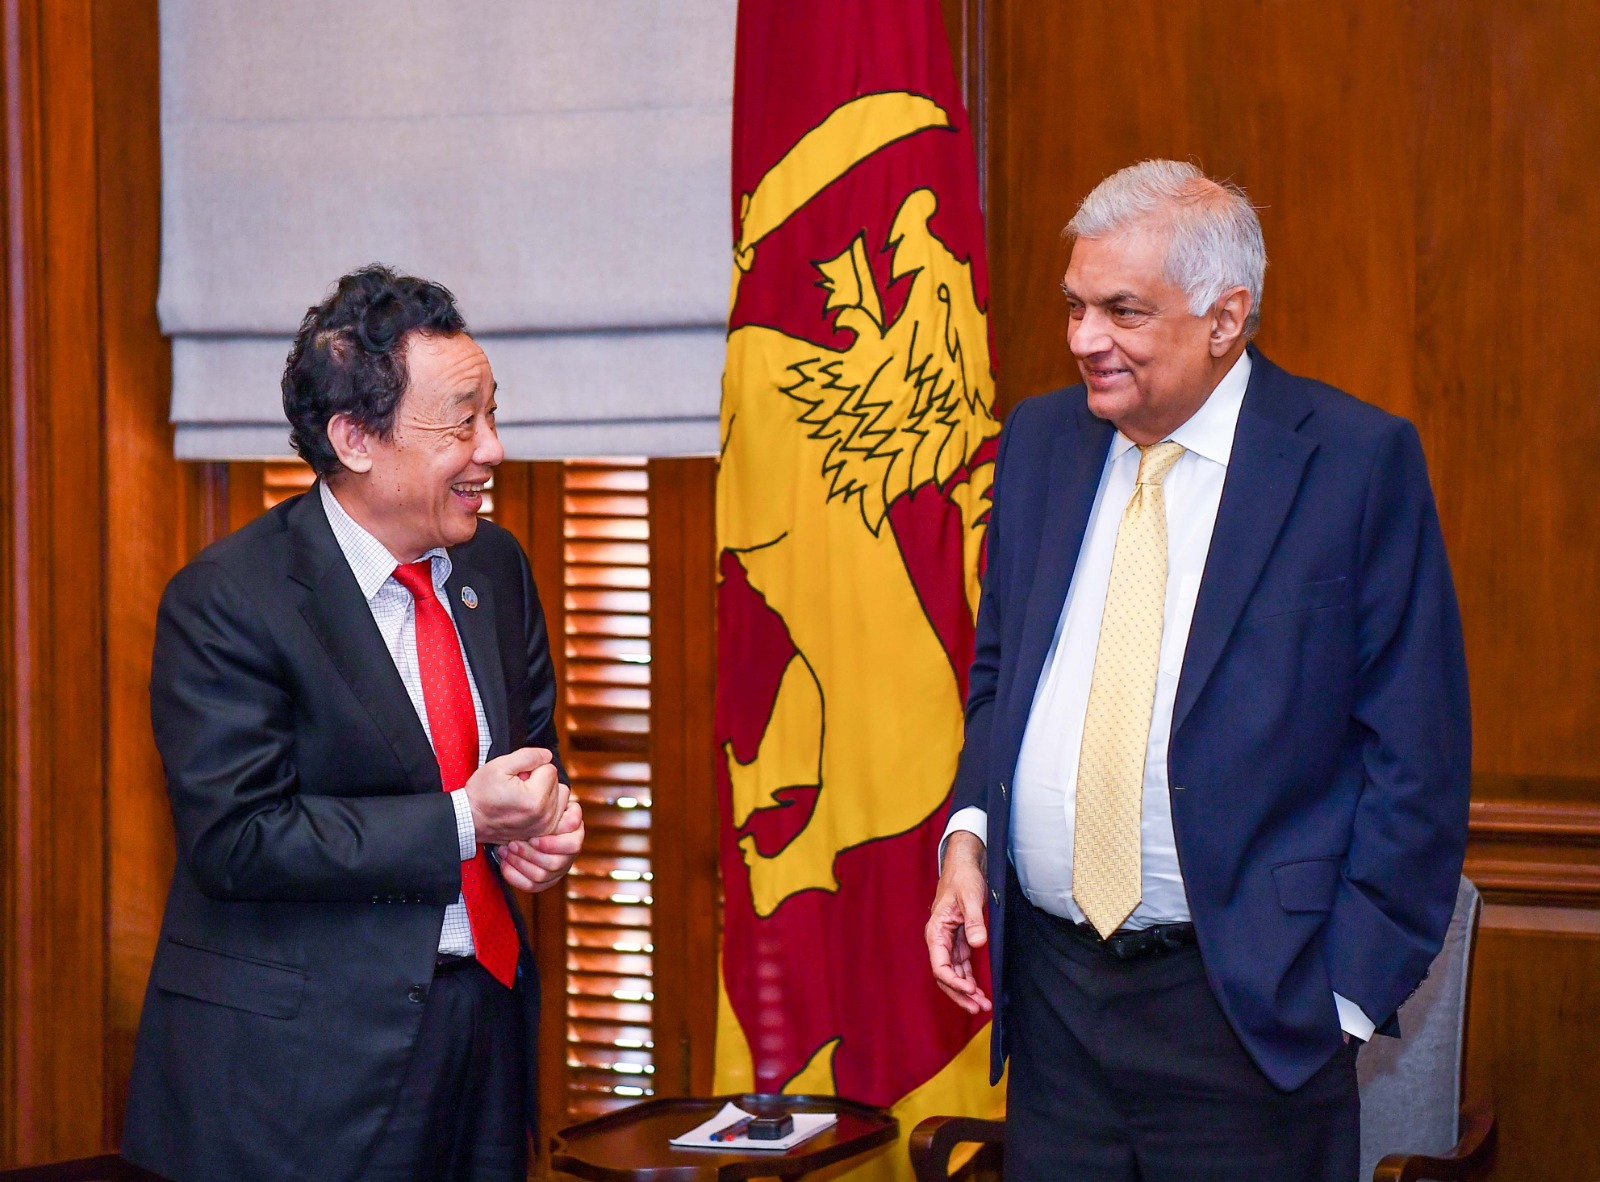 UN FAO to support Sri Lanka during these critical times